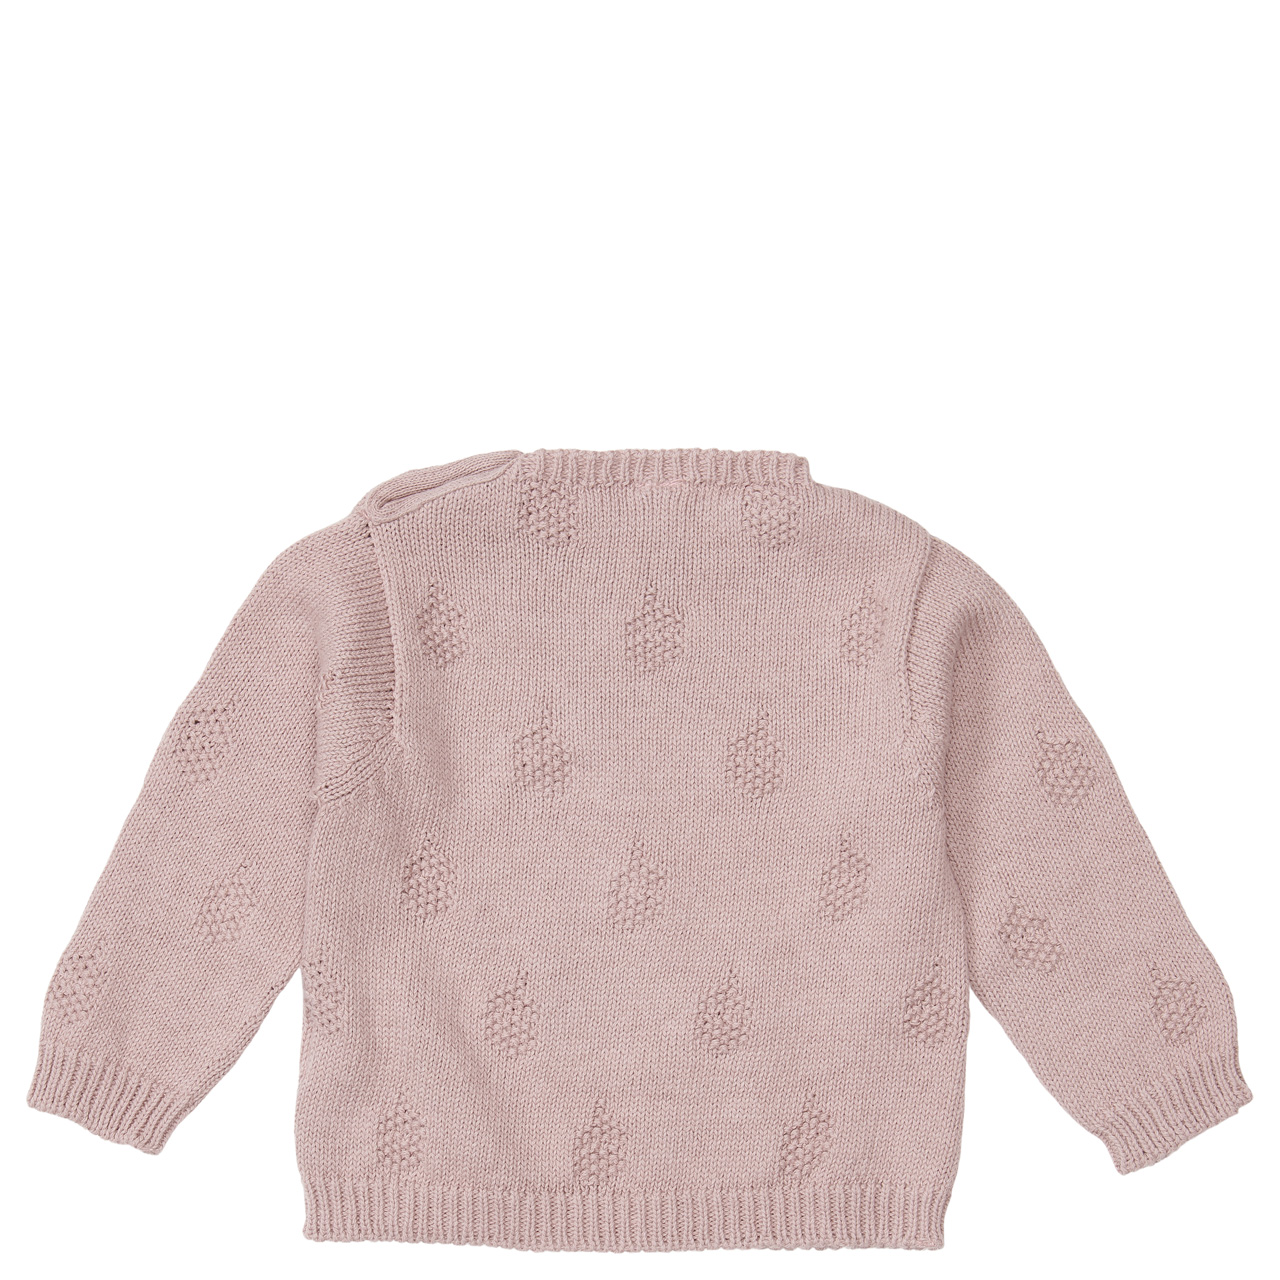 Babypullover Nuts soft mauve